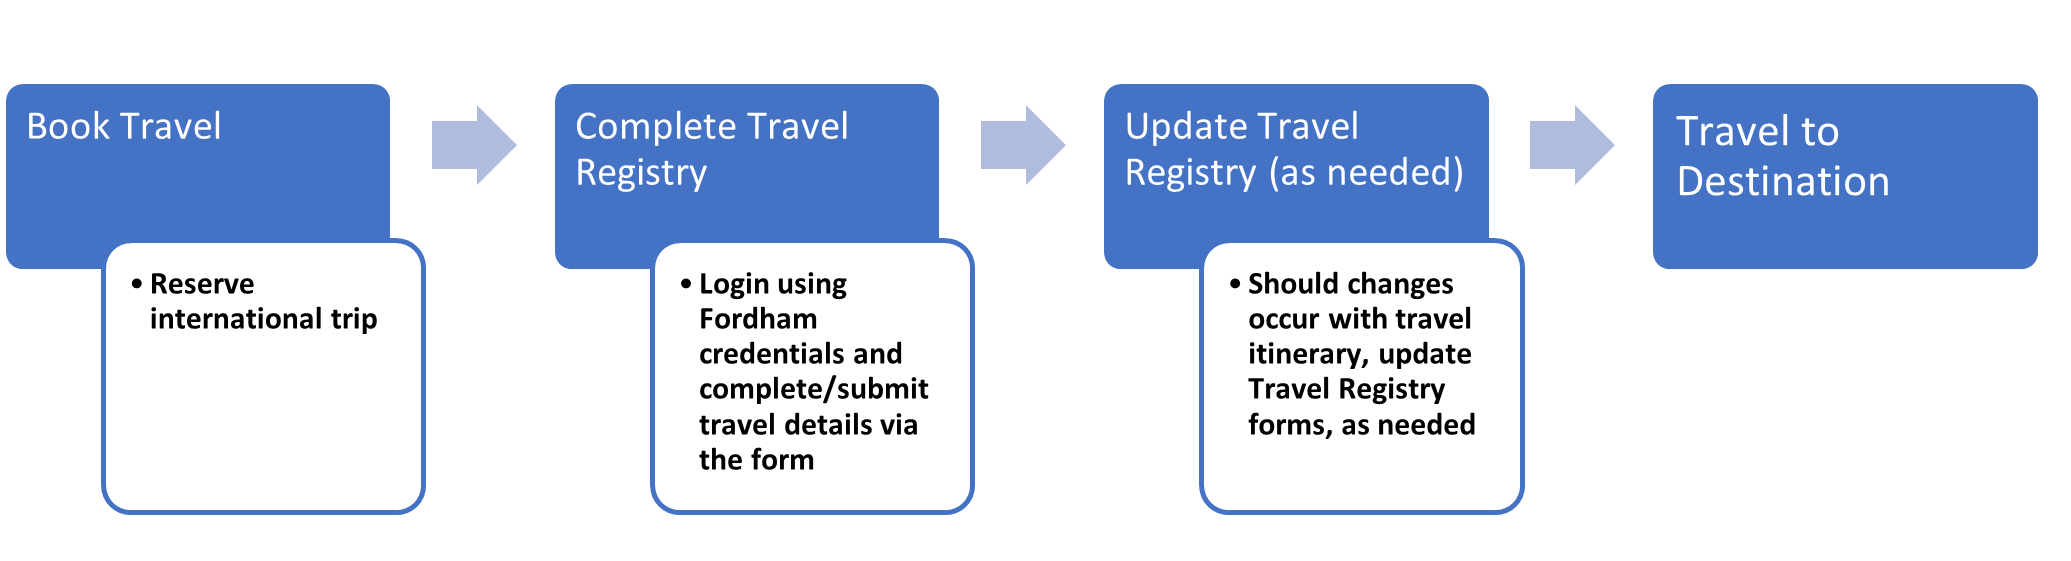 Flow chart showing the steps to plan and book international travel.